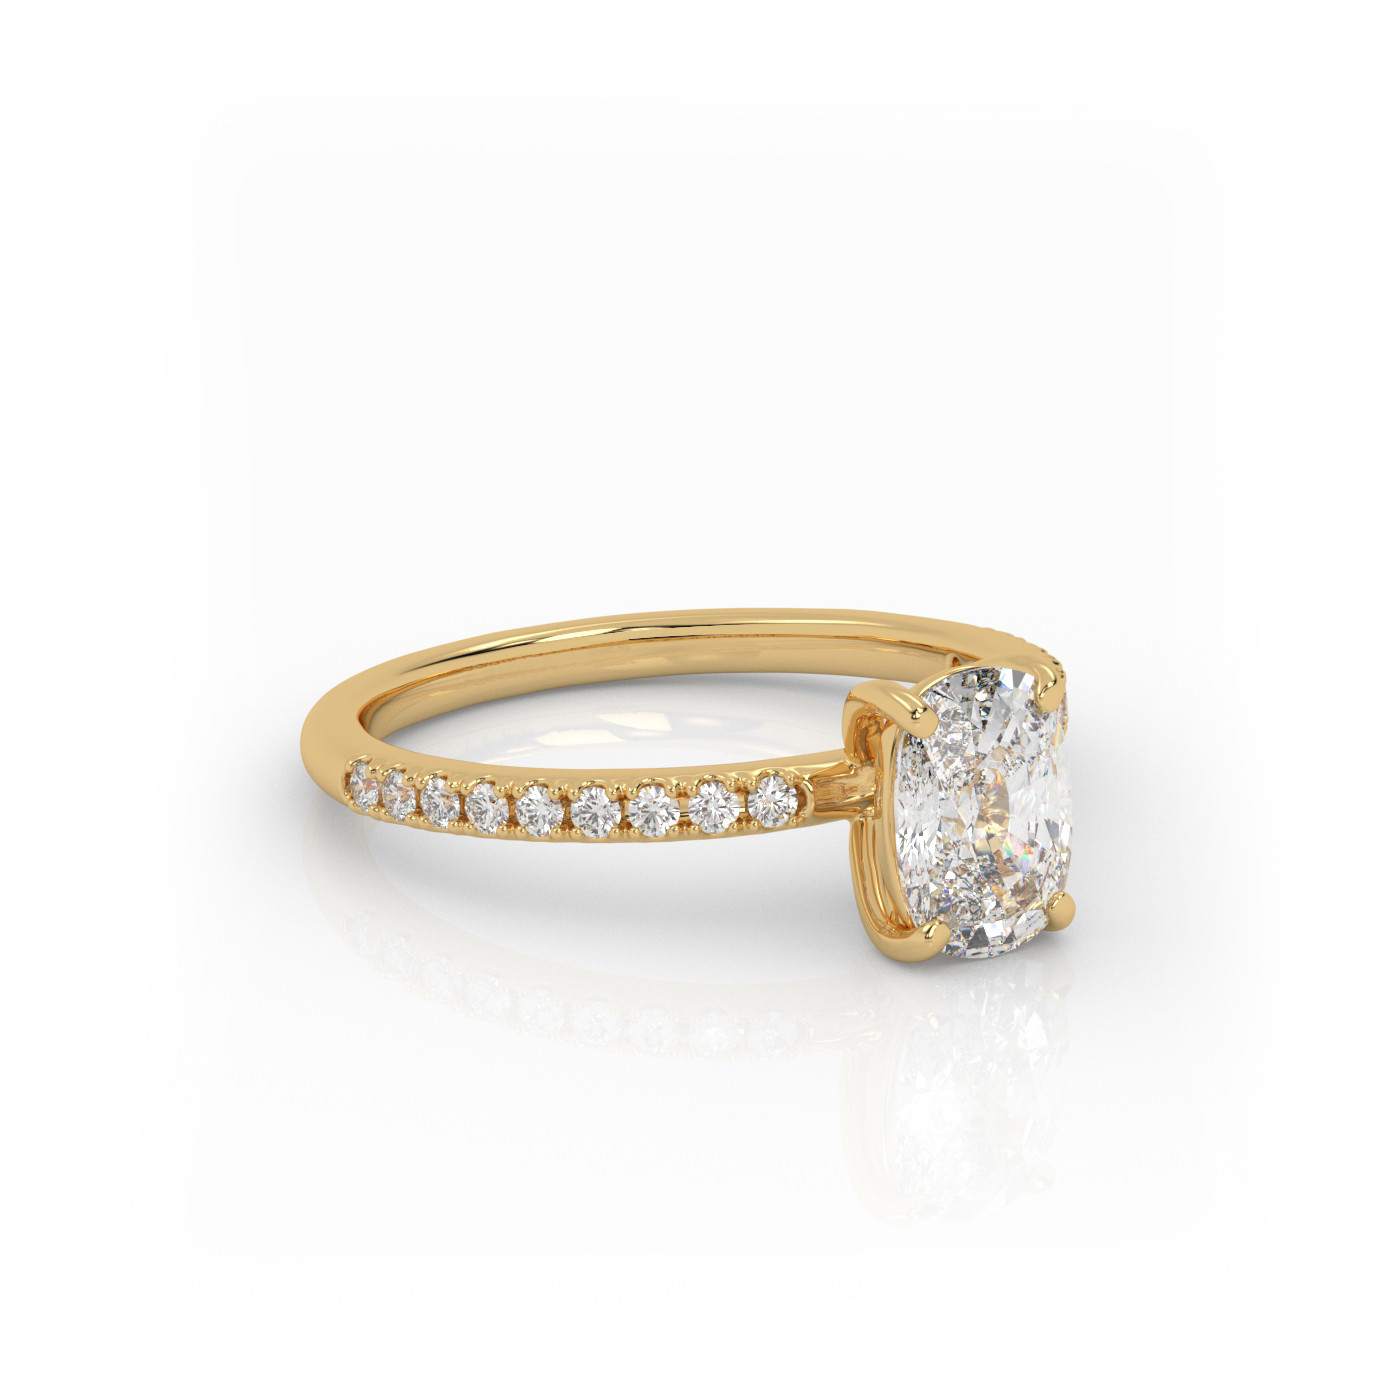 18K YELLOW GOLD Elongated Cushion Cut Solitaire Engagement Ring with Pave Band